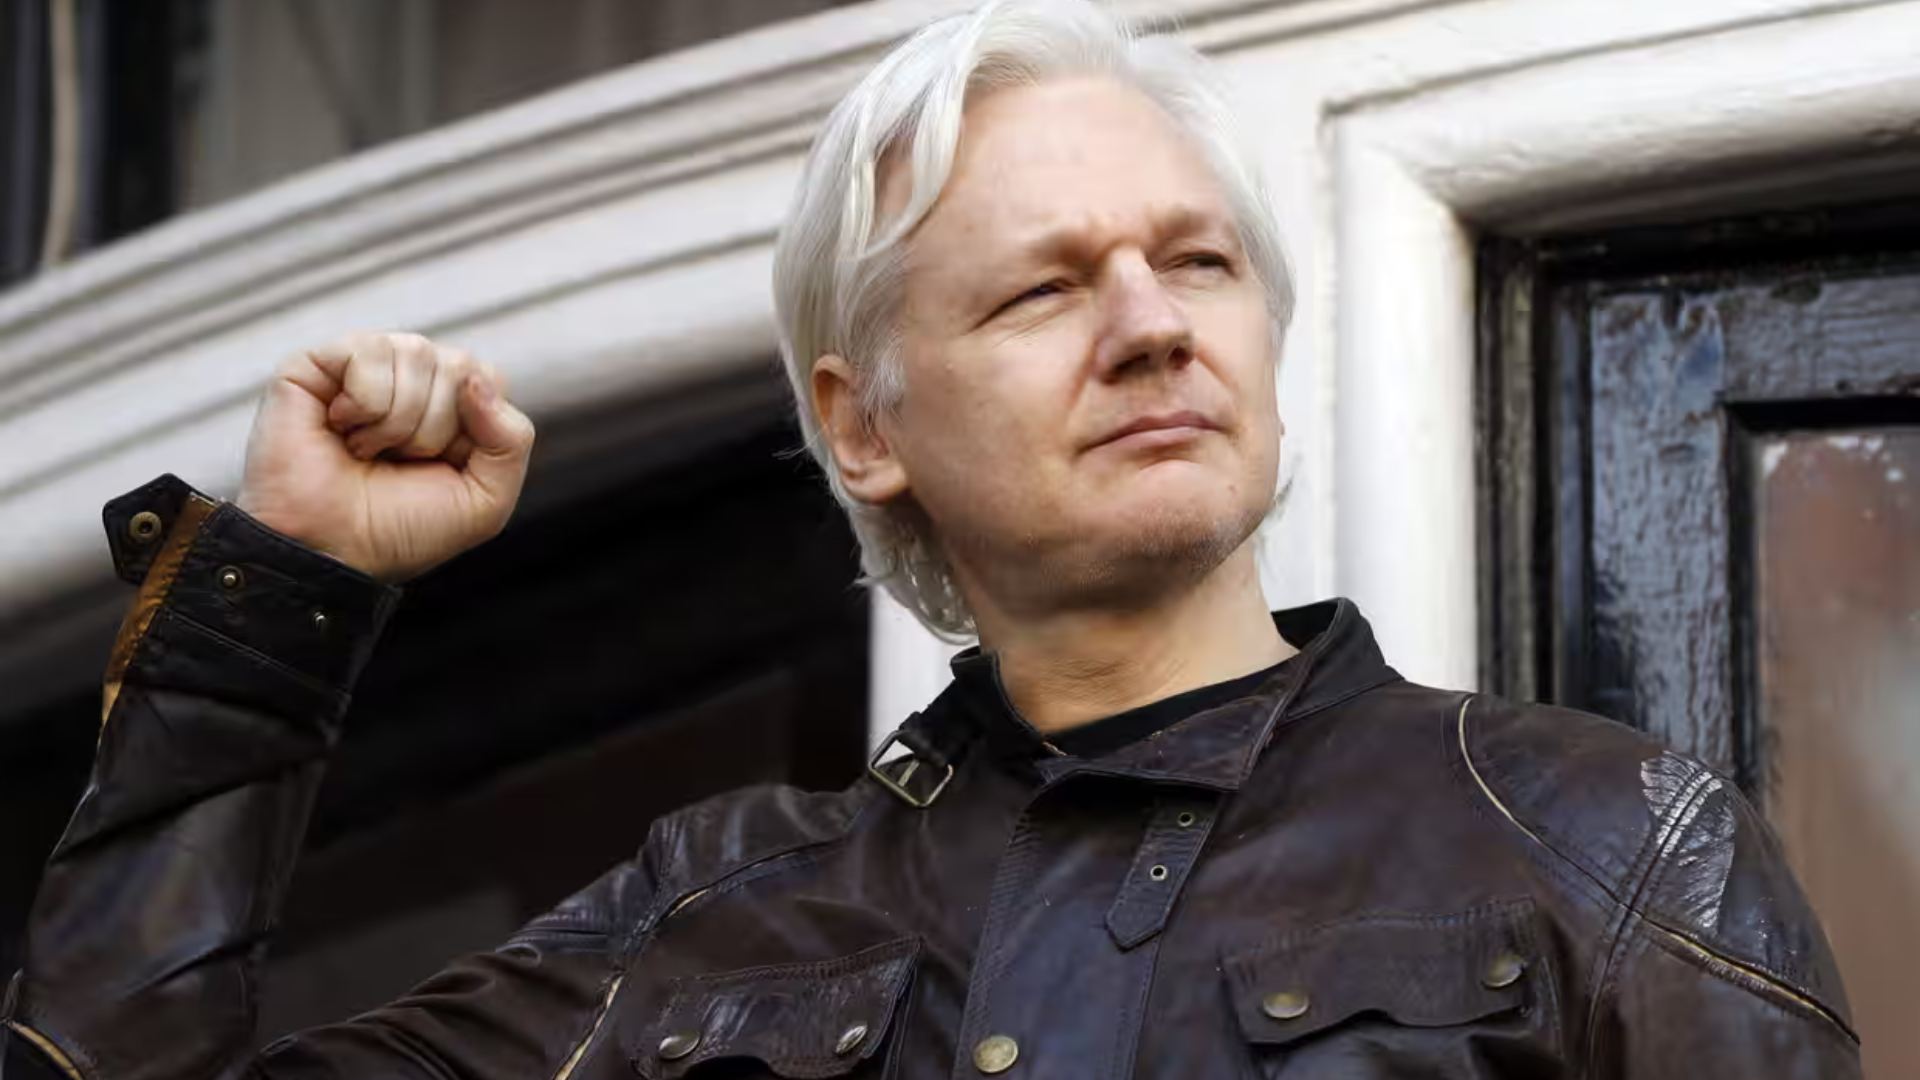 Explained: Who is Julian Assange and Why is He About to Plead Guilty to Espionage?